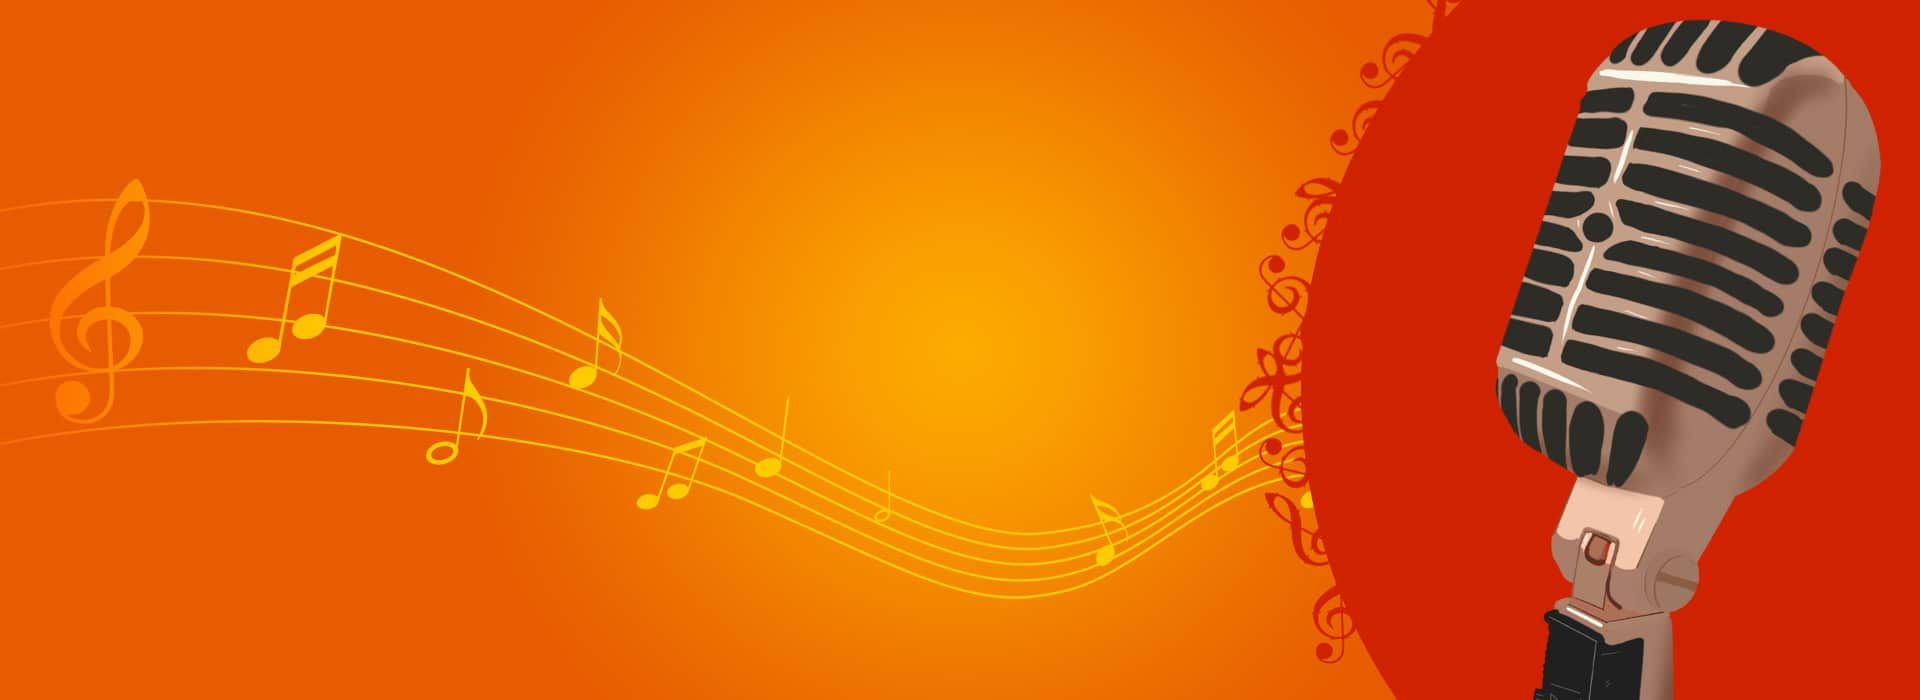 My music and me 1